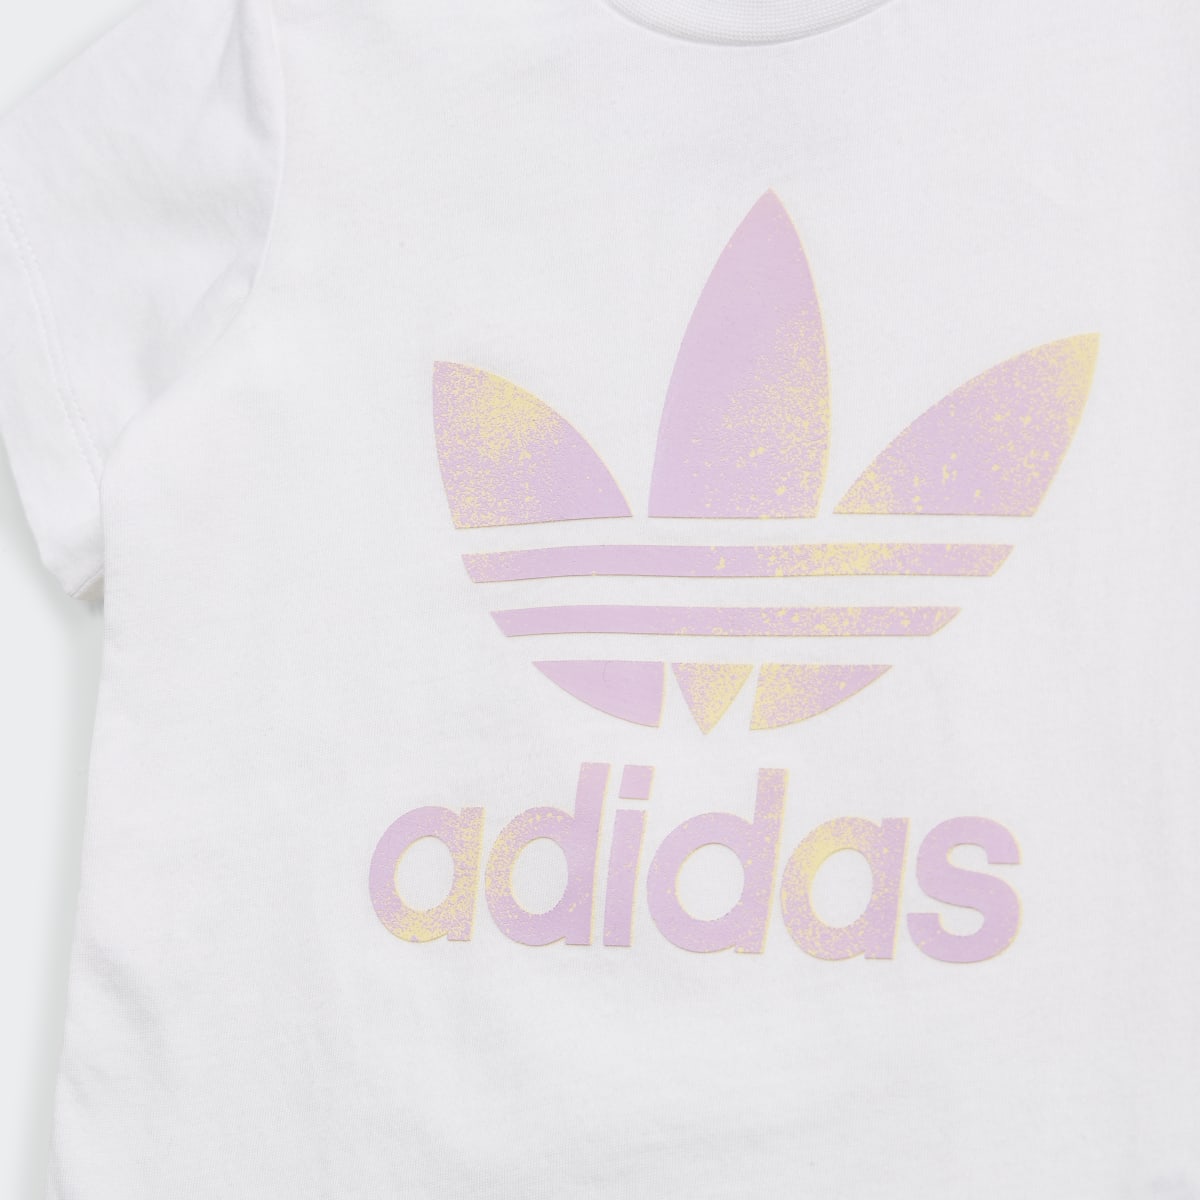 Adidas Completo Graphic Logo Shorts and Tee. 9